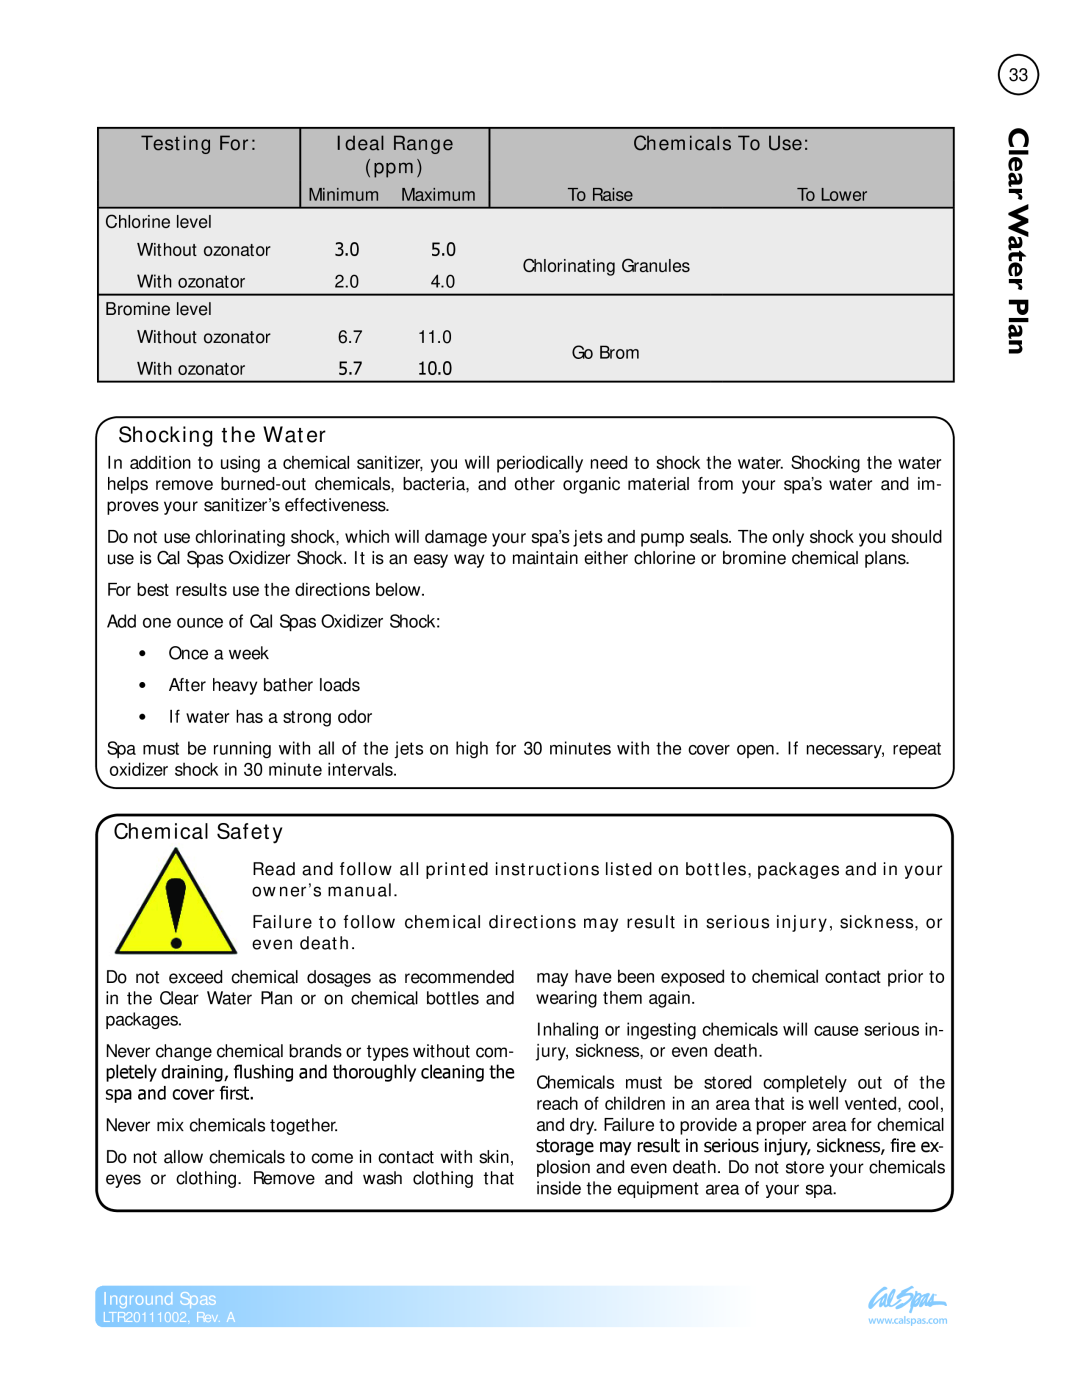 Cal Spas LTR20111002 Shocking the Water, Chemical Safety, Ideal Range, Clear Water Plan, Testing For, Chemicals To Use 